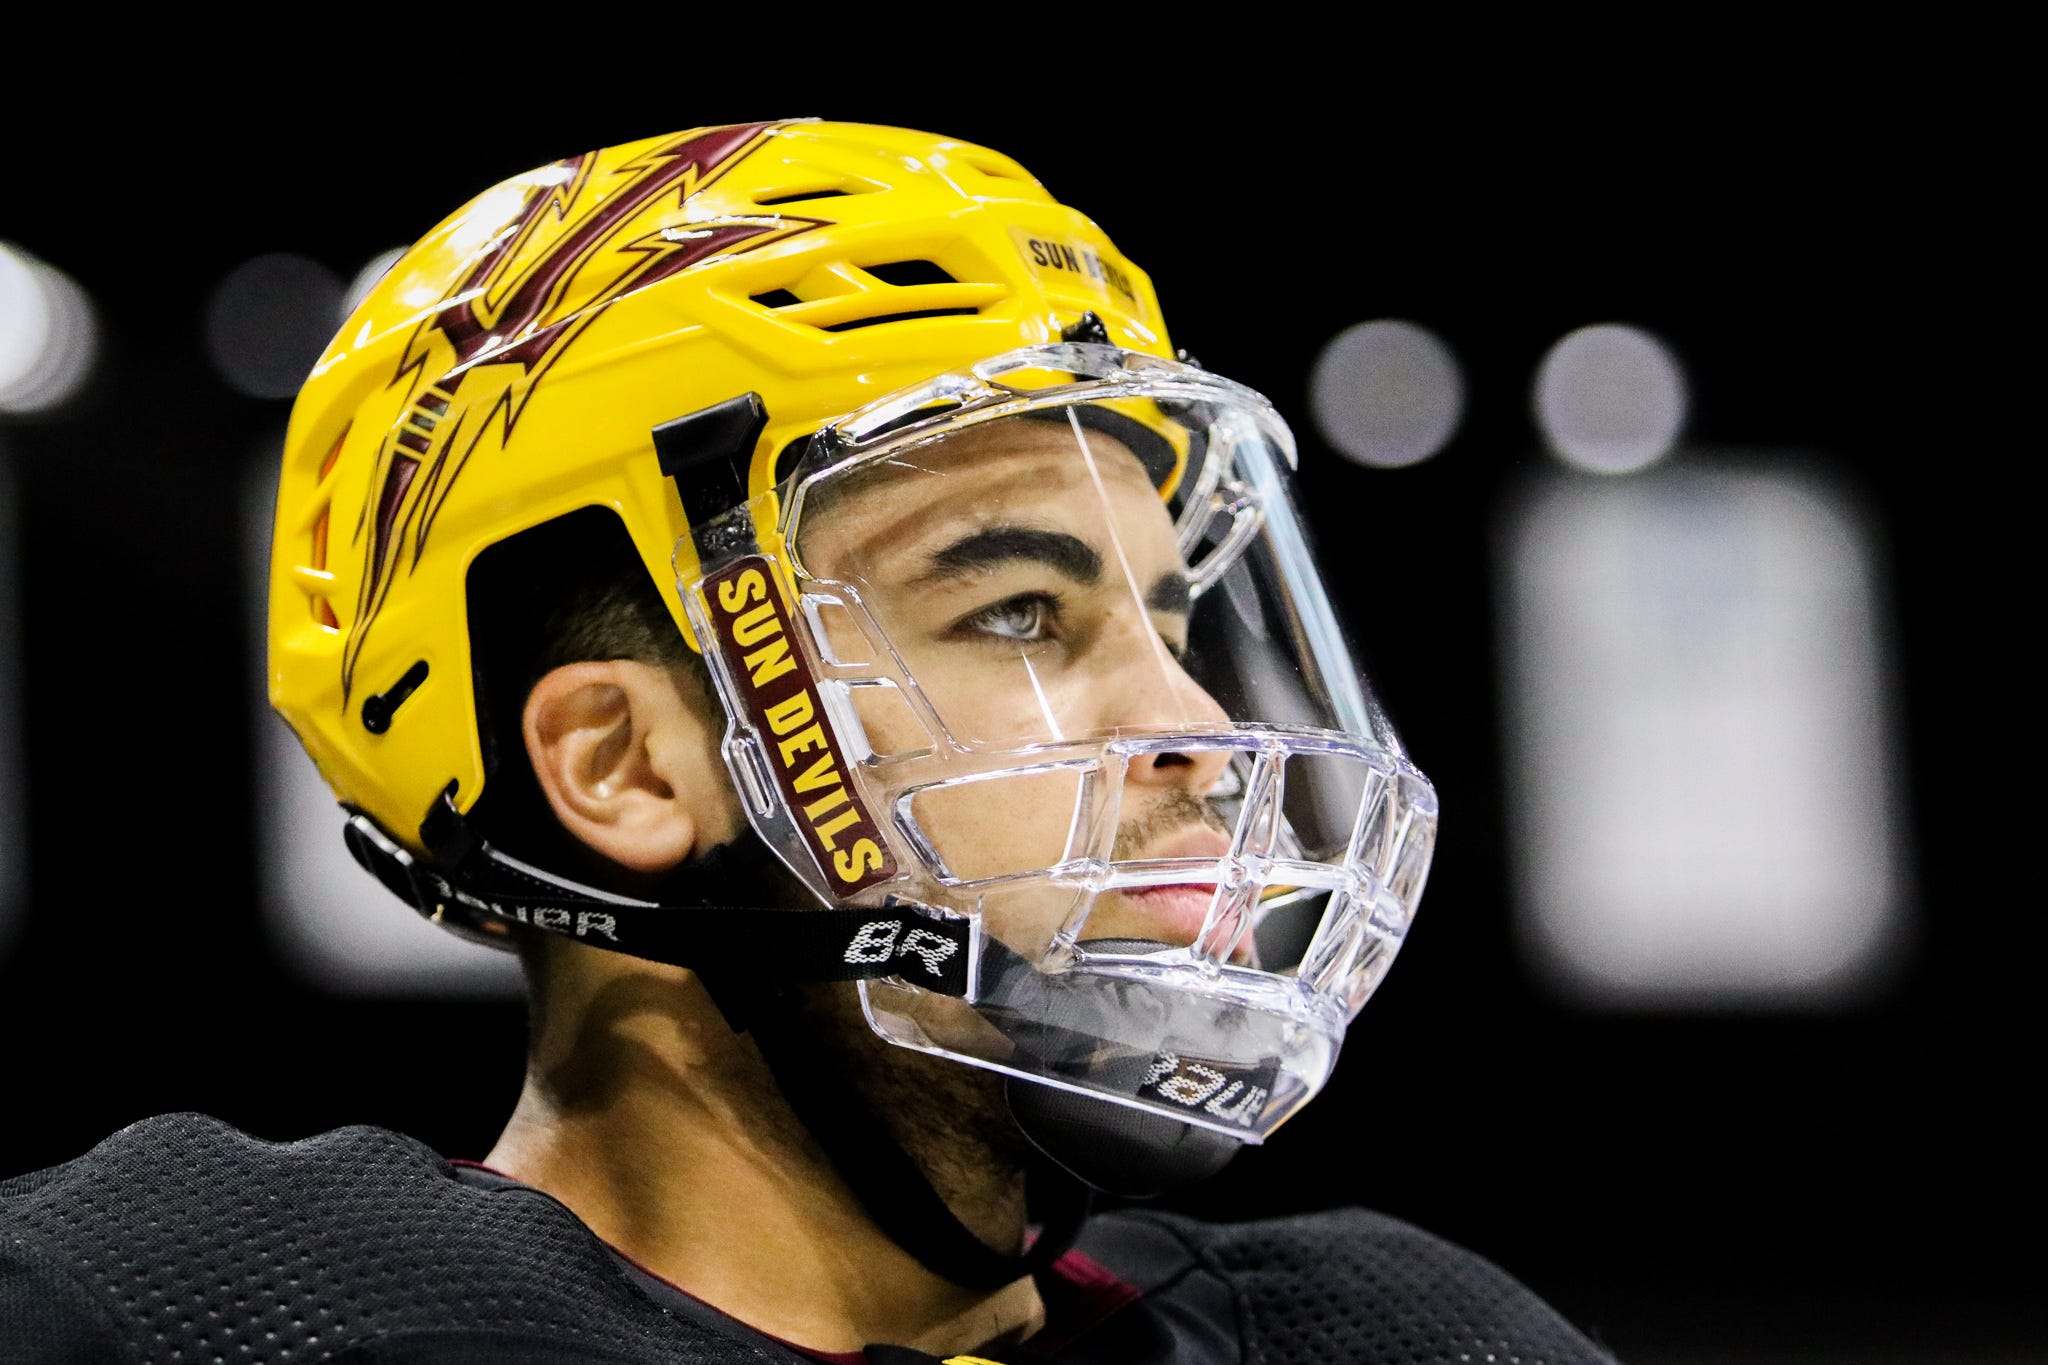 Sun Devil hockey says so long to former home, looks ahead to new arena